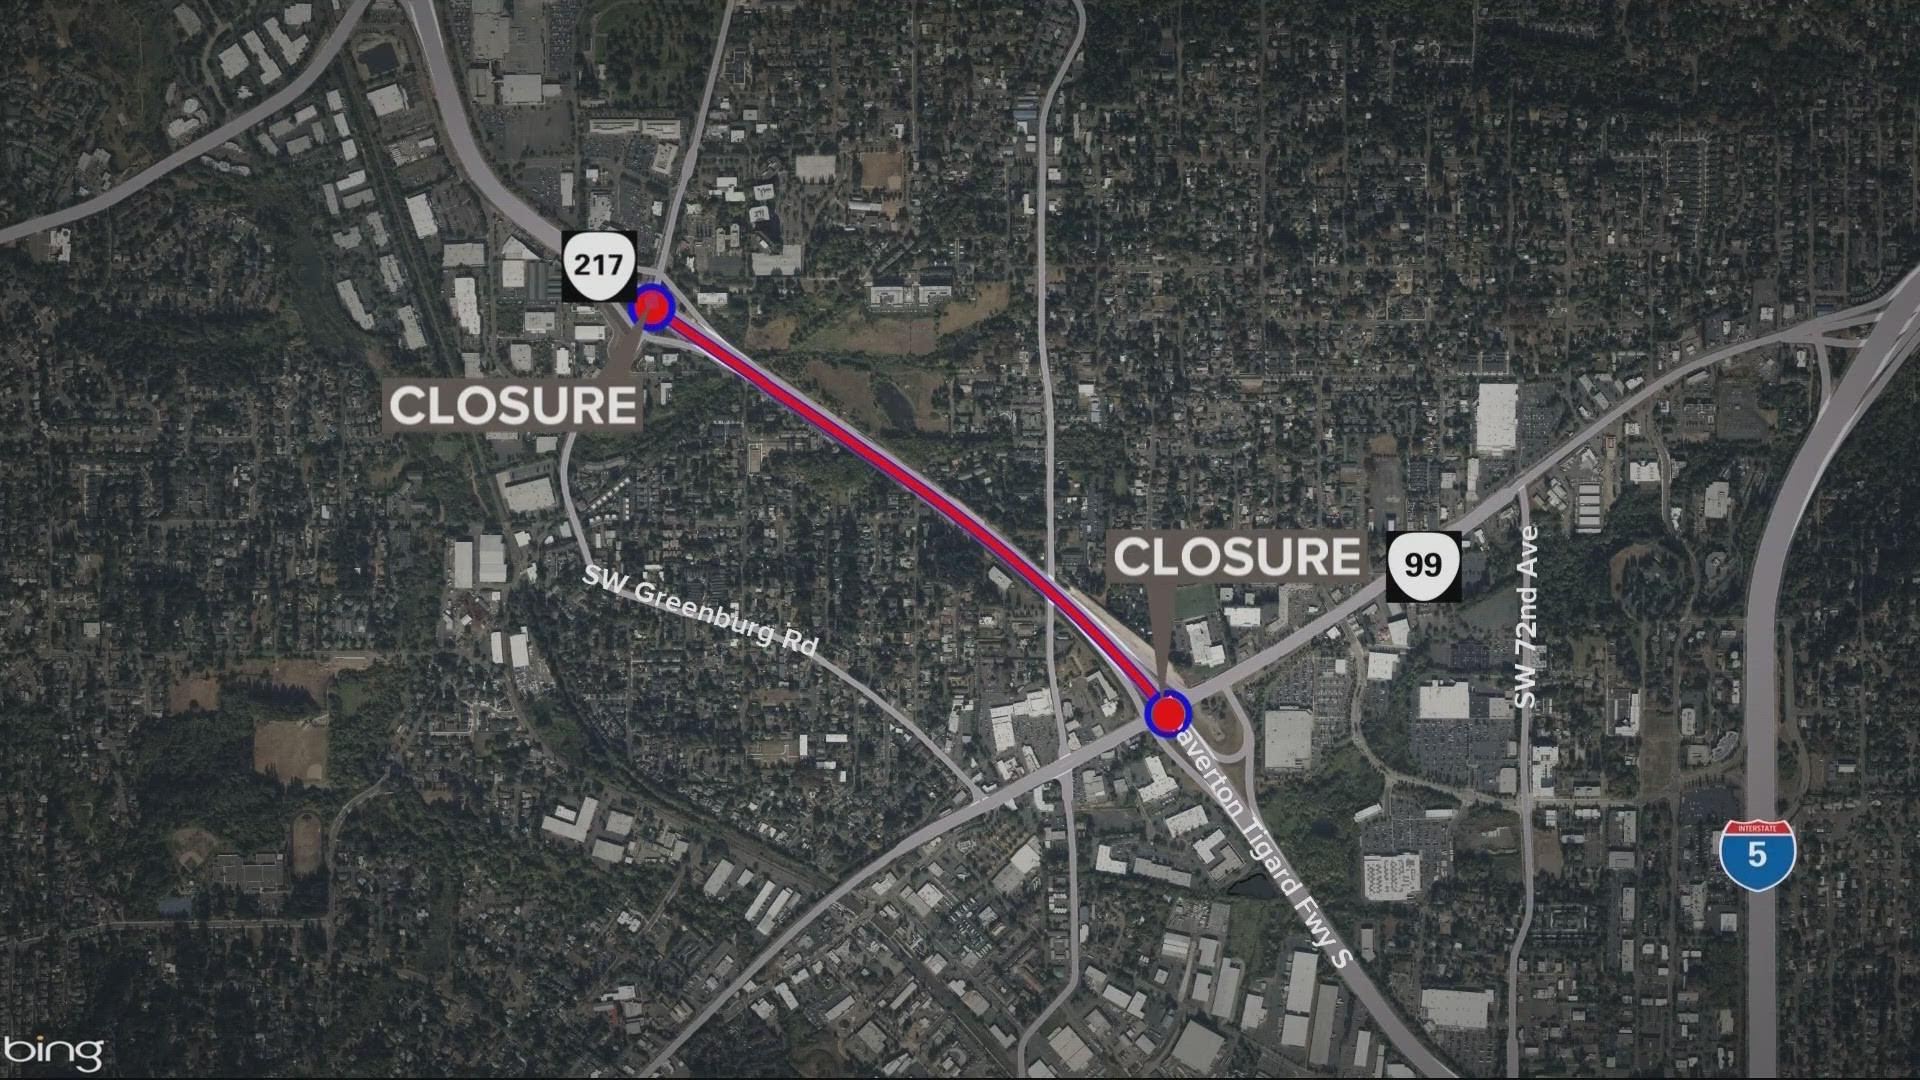 The temporary closure is part of the Oregon 217 Auxiliary Lanes Project, which aims to increase safety and cut down on bottlenecking on the highway.